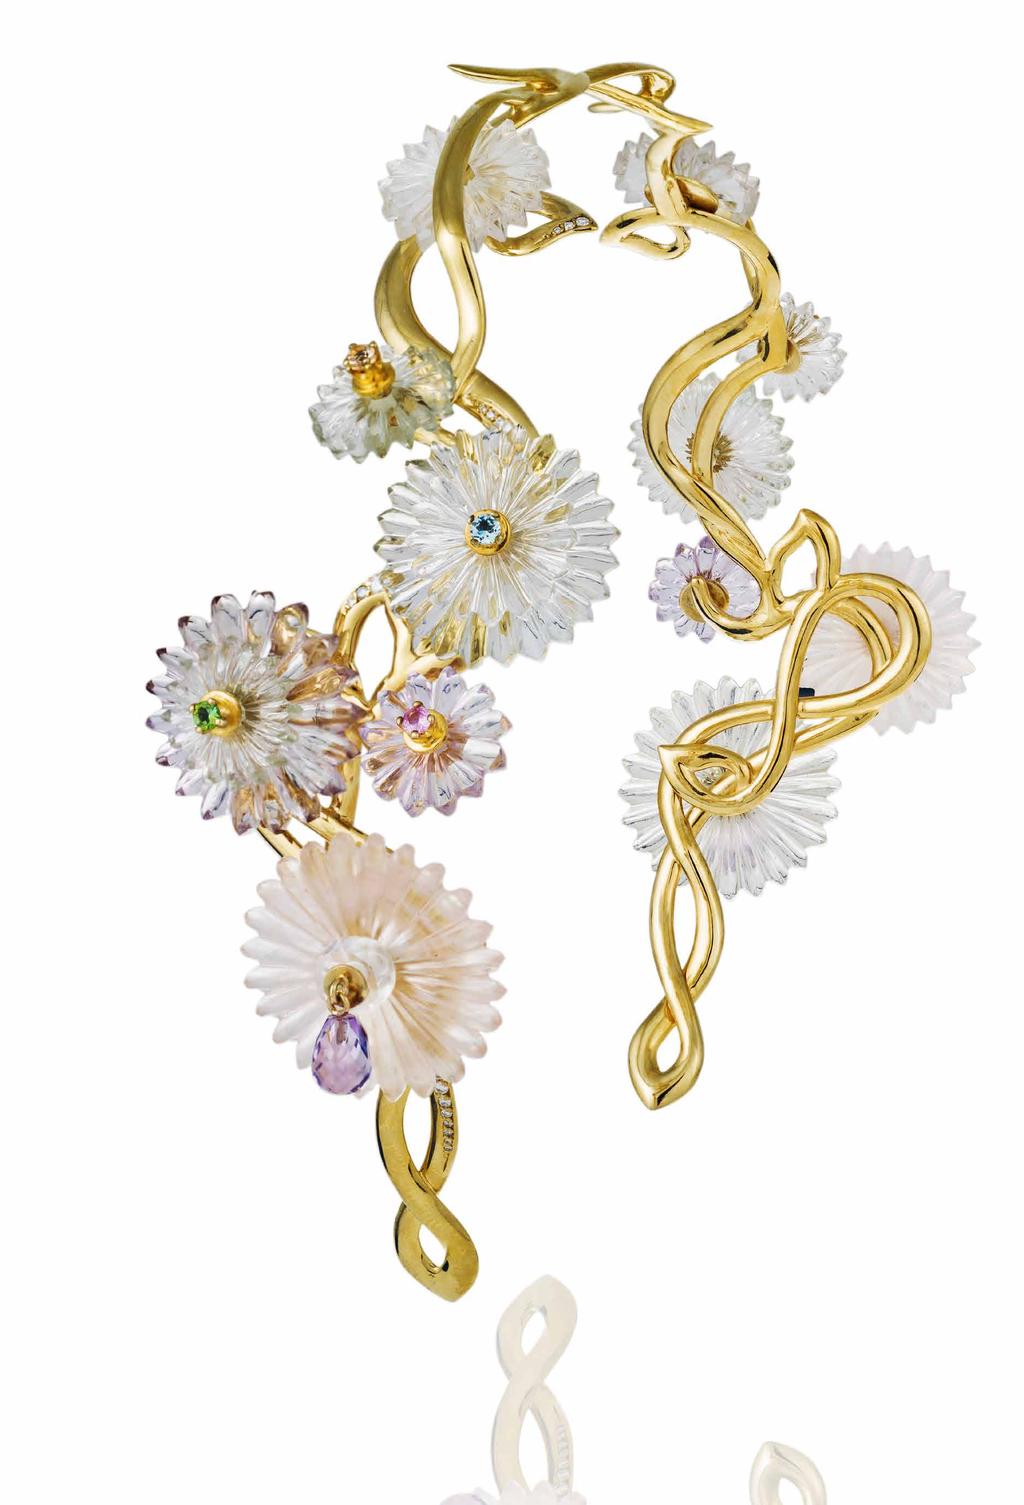 Summer Snow Hair Jewel in 18K gold vermeil plated silver, set with white diamonds, hand carved amethyst, green amethyst, cloudy rose quartz, rose quartz and rock crystal, with central morganite,